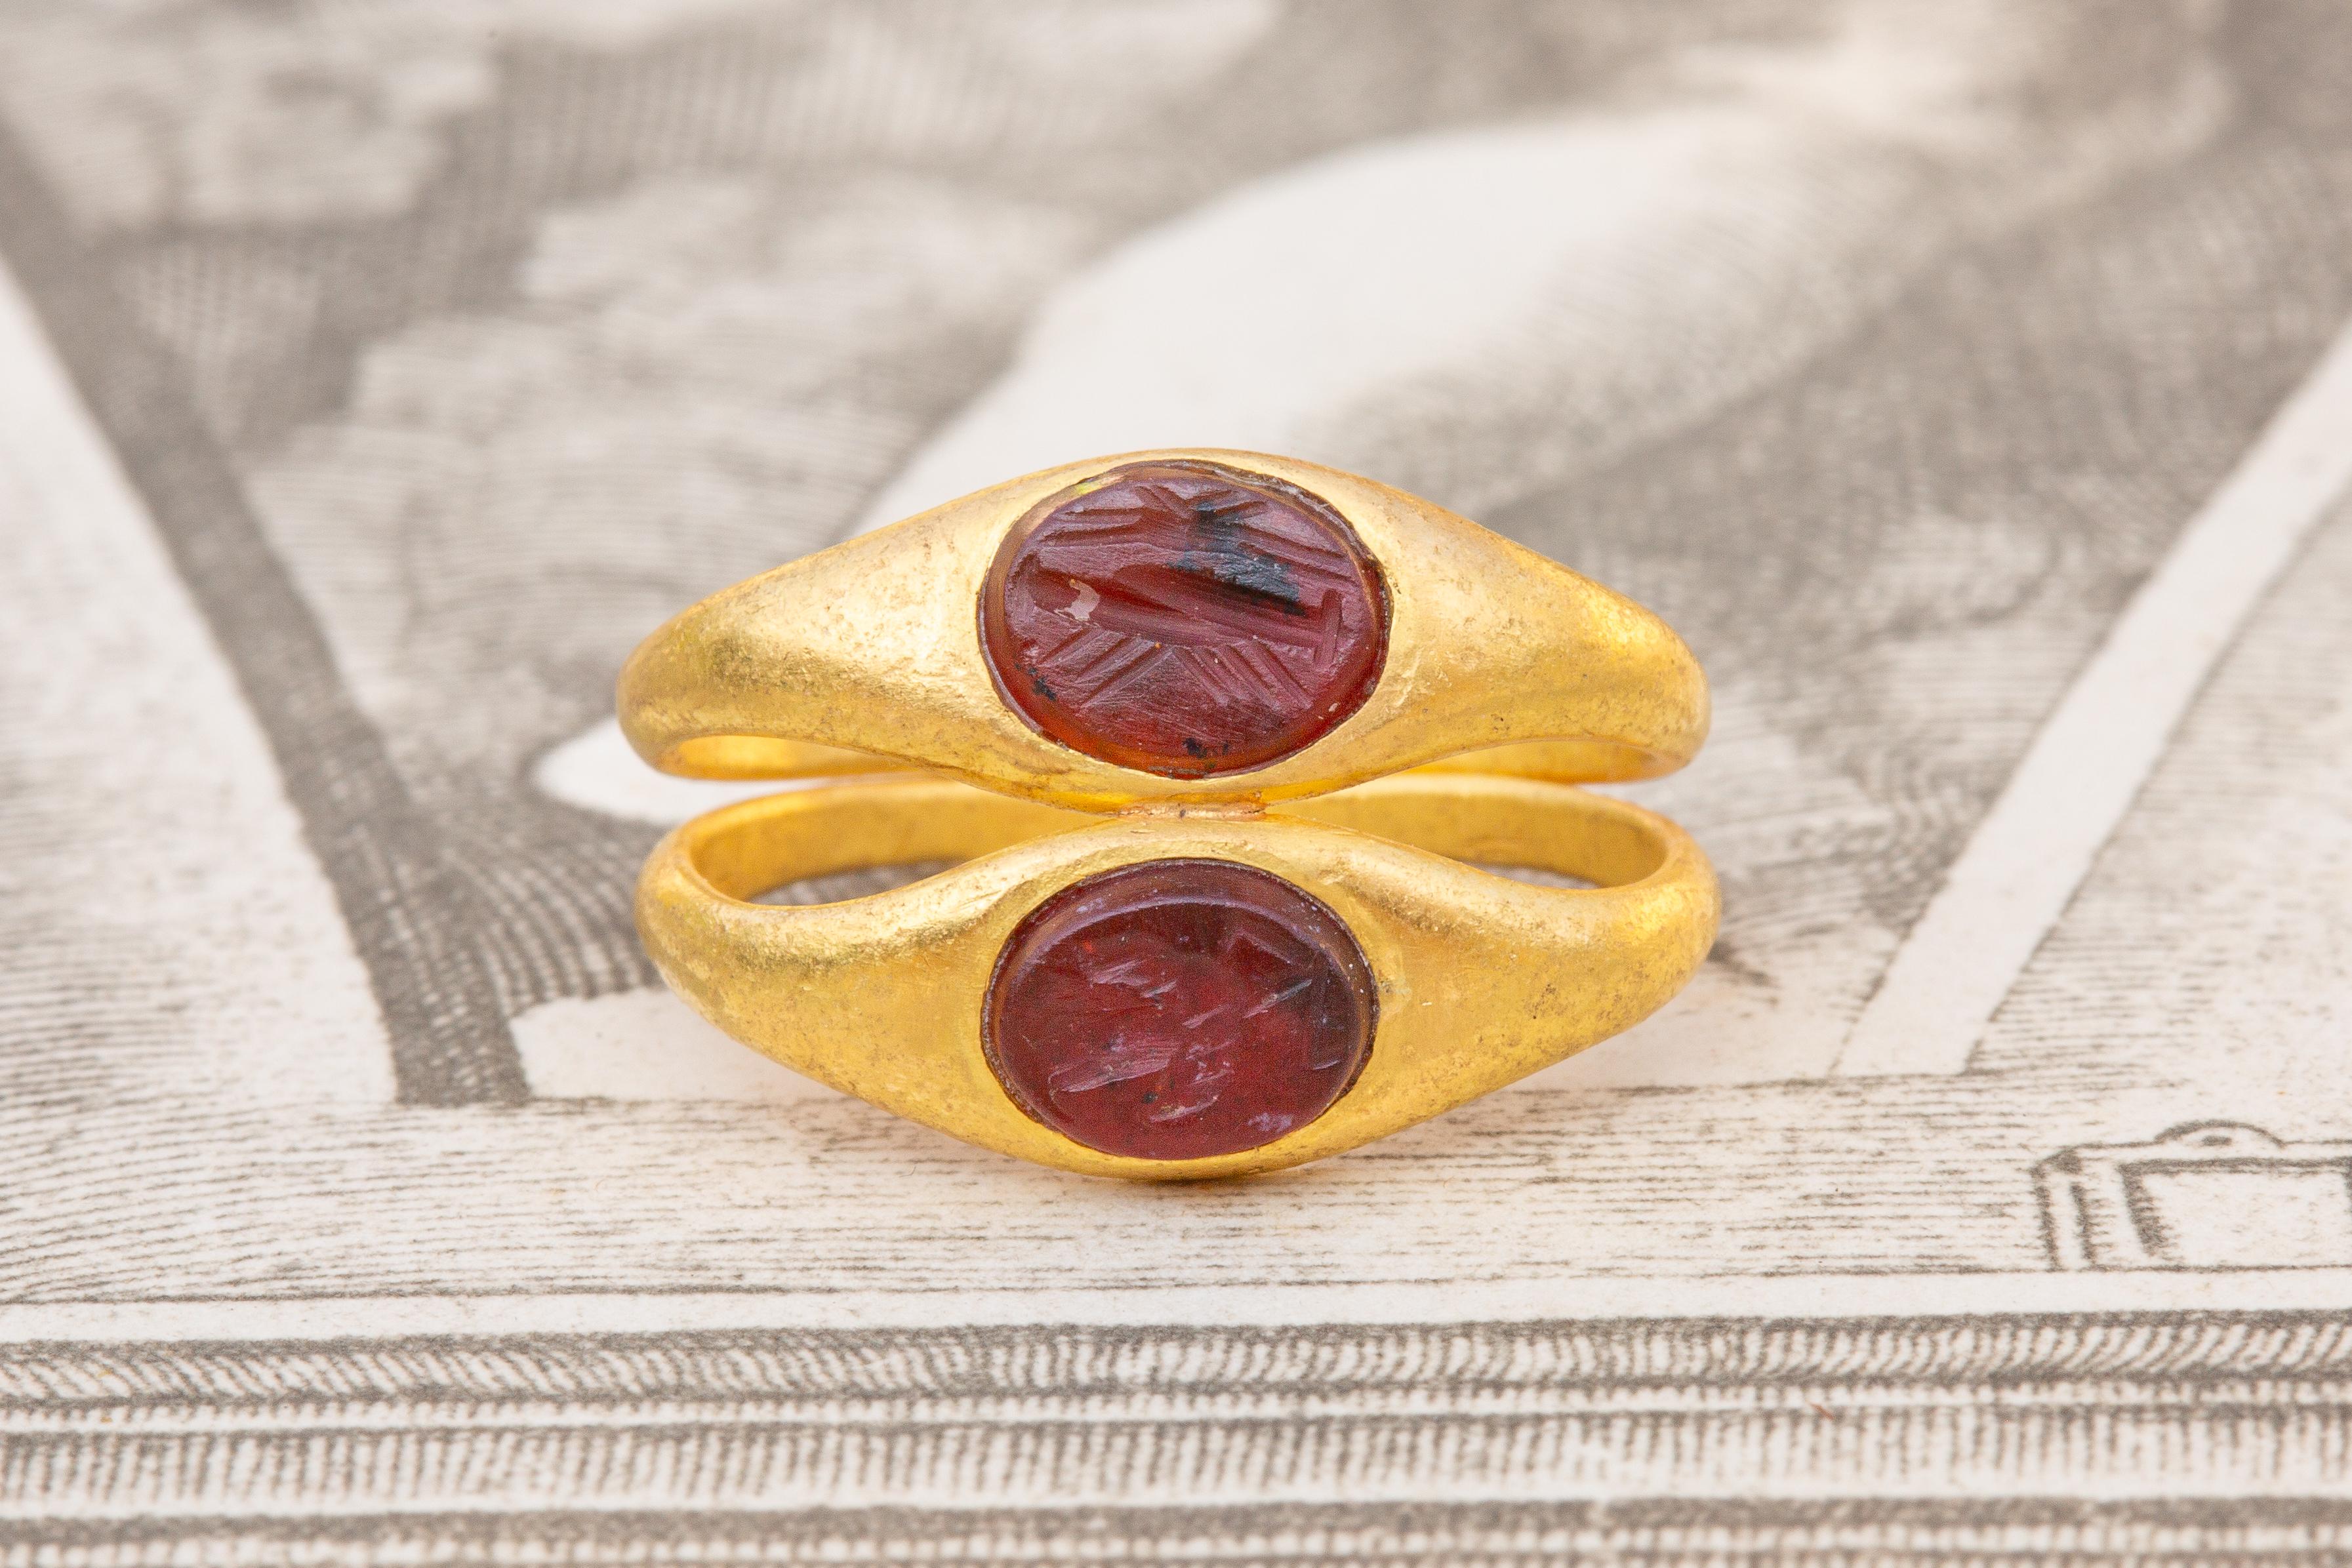 A beautiful and scarce example of an Ancient Roman ‘twin’ ring set with carnelian intaglios, circa 1st - 3rd century AD. The mount is crafted in high karat gold and bifurcates at the very back of the shank into twin bands which reconnect at the